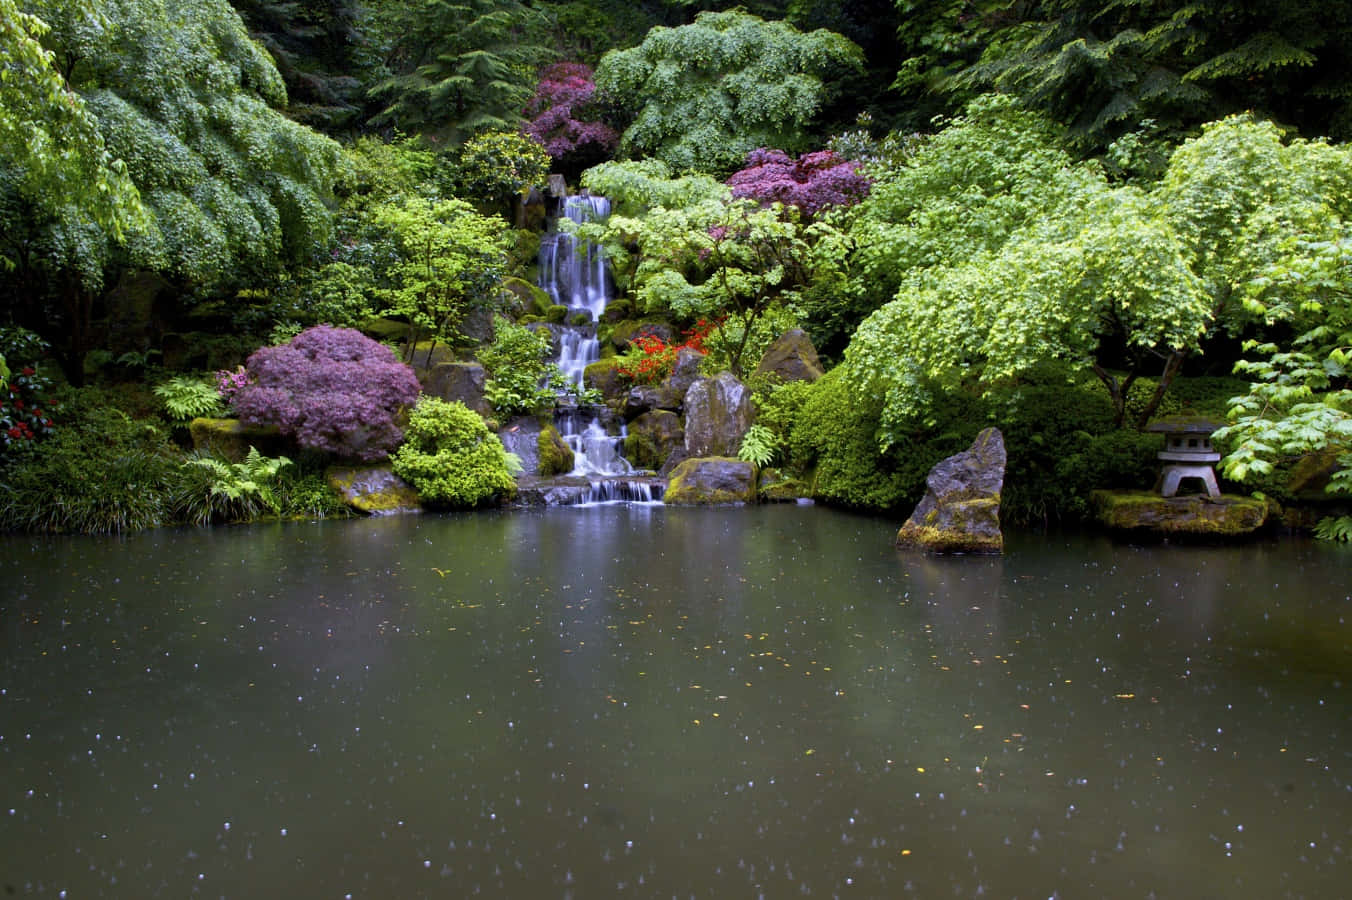 Take a breather in the tranquility of a nature garden